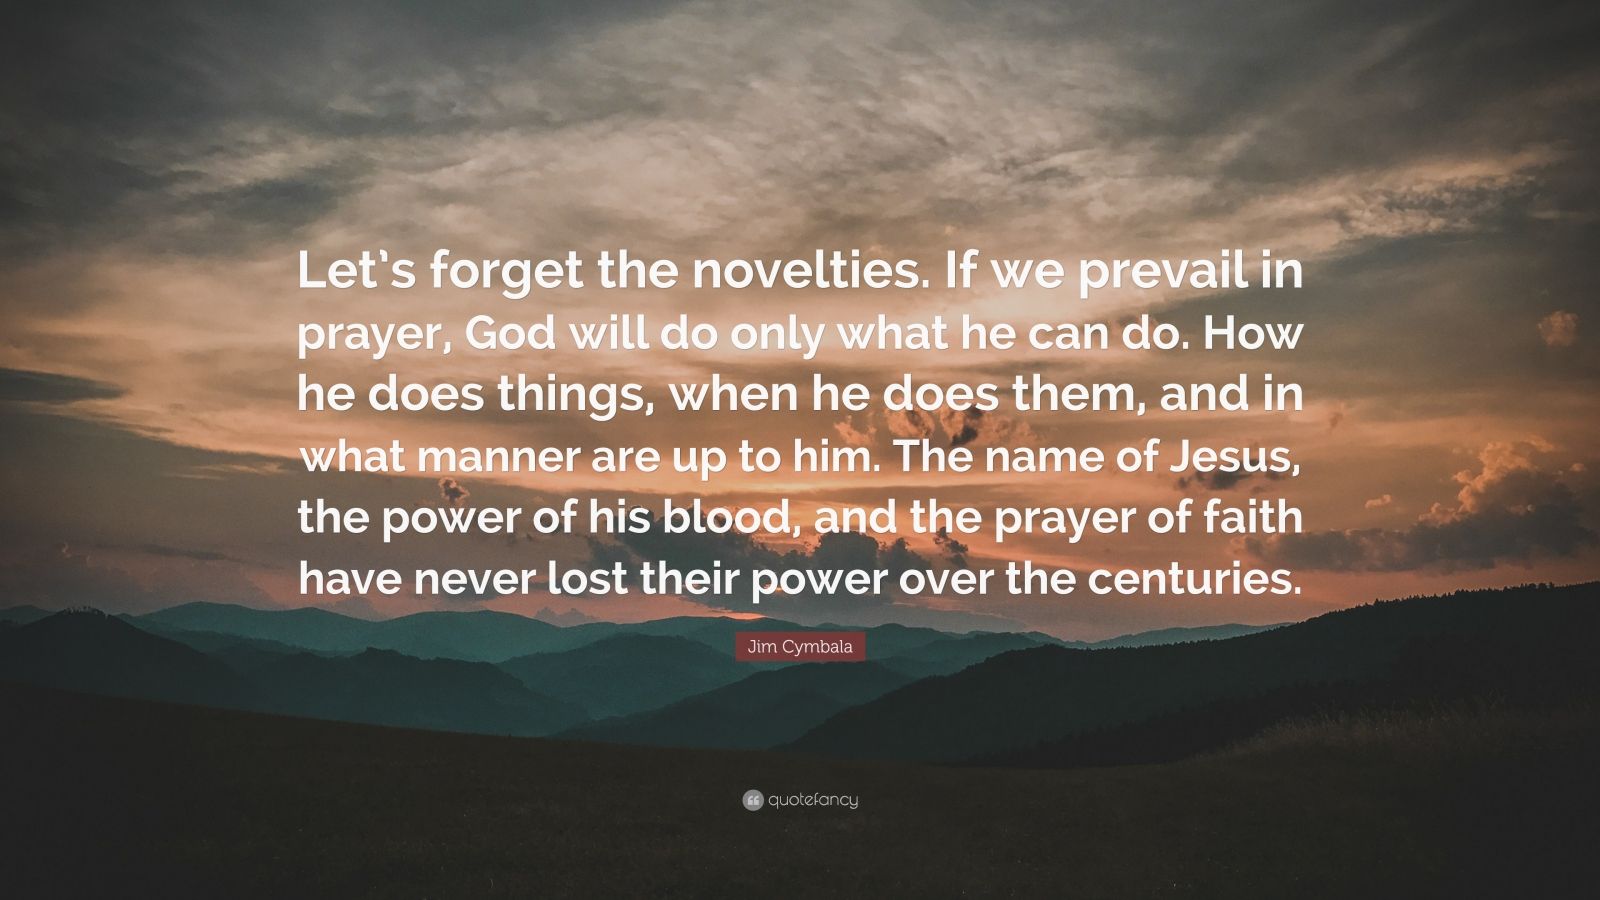 Jim Cymbala Quote: “Let’s forget the novelties. If we prevail in prayer ...